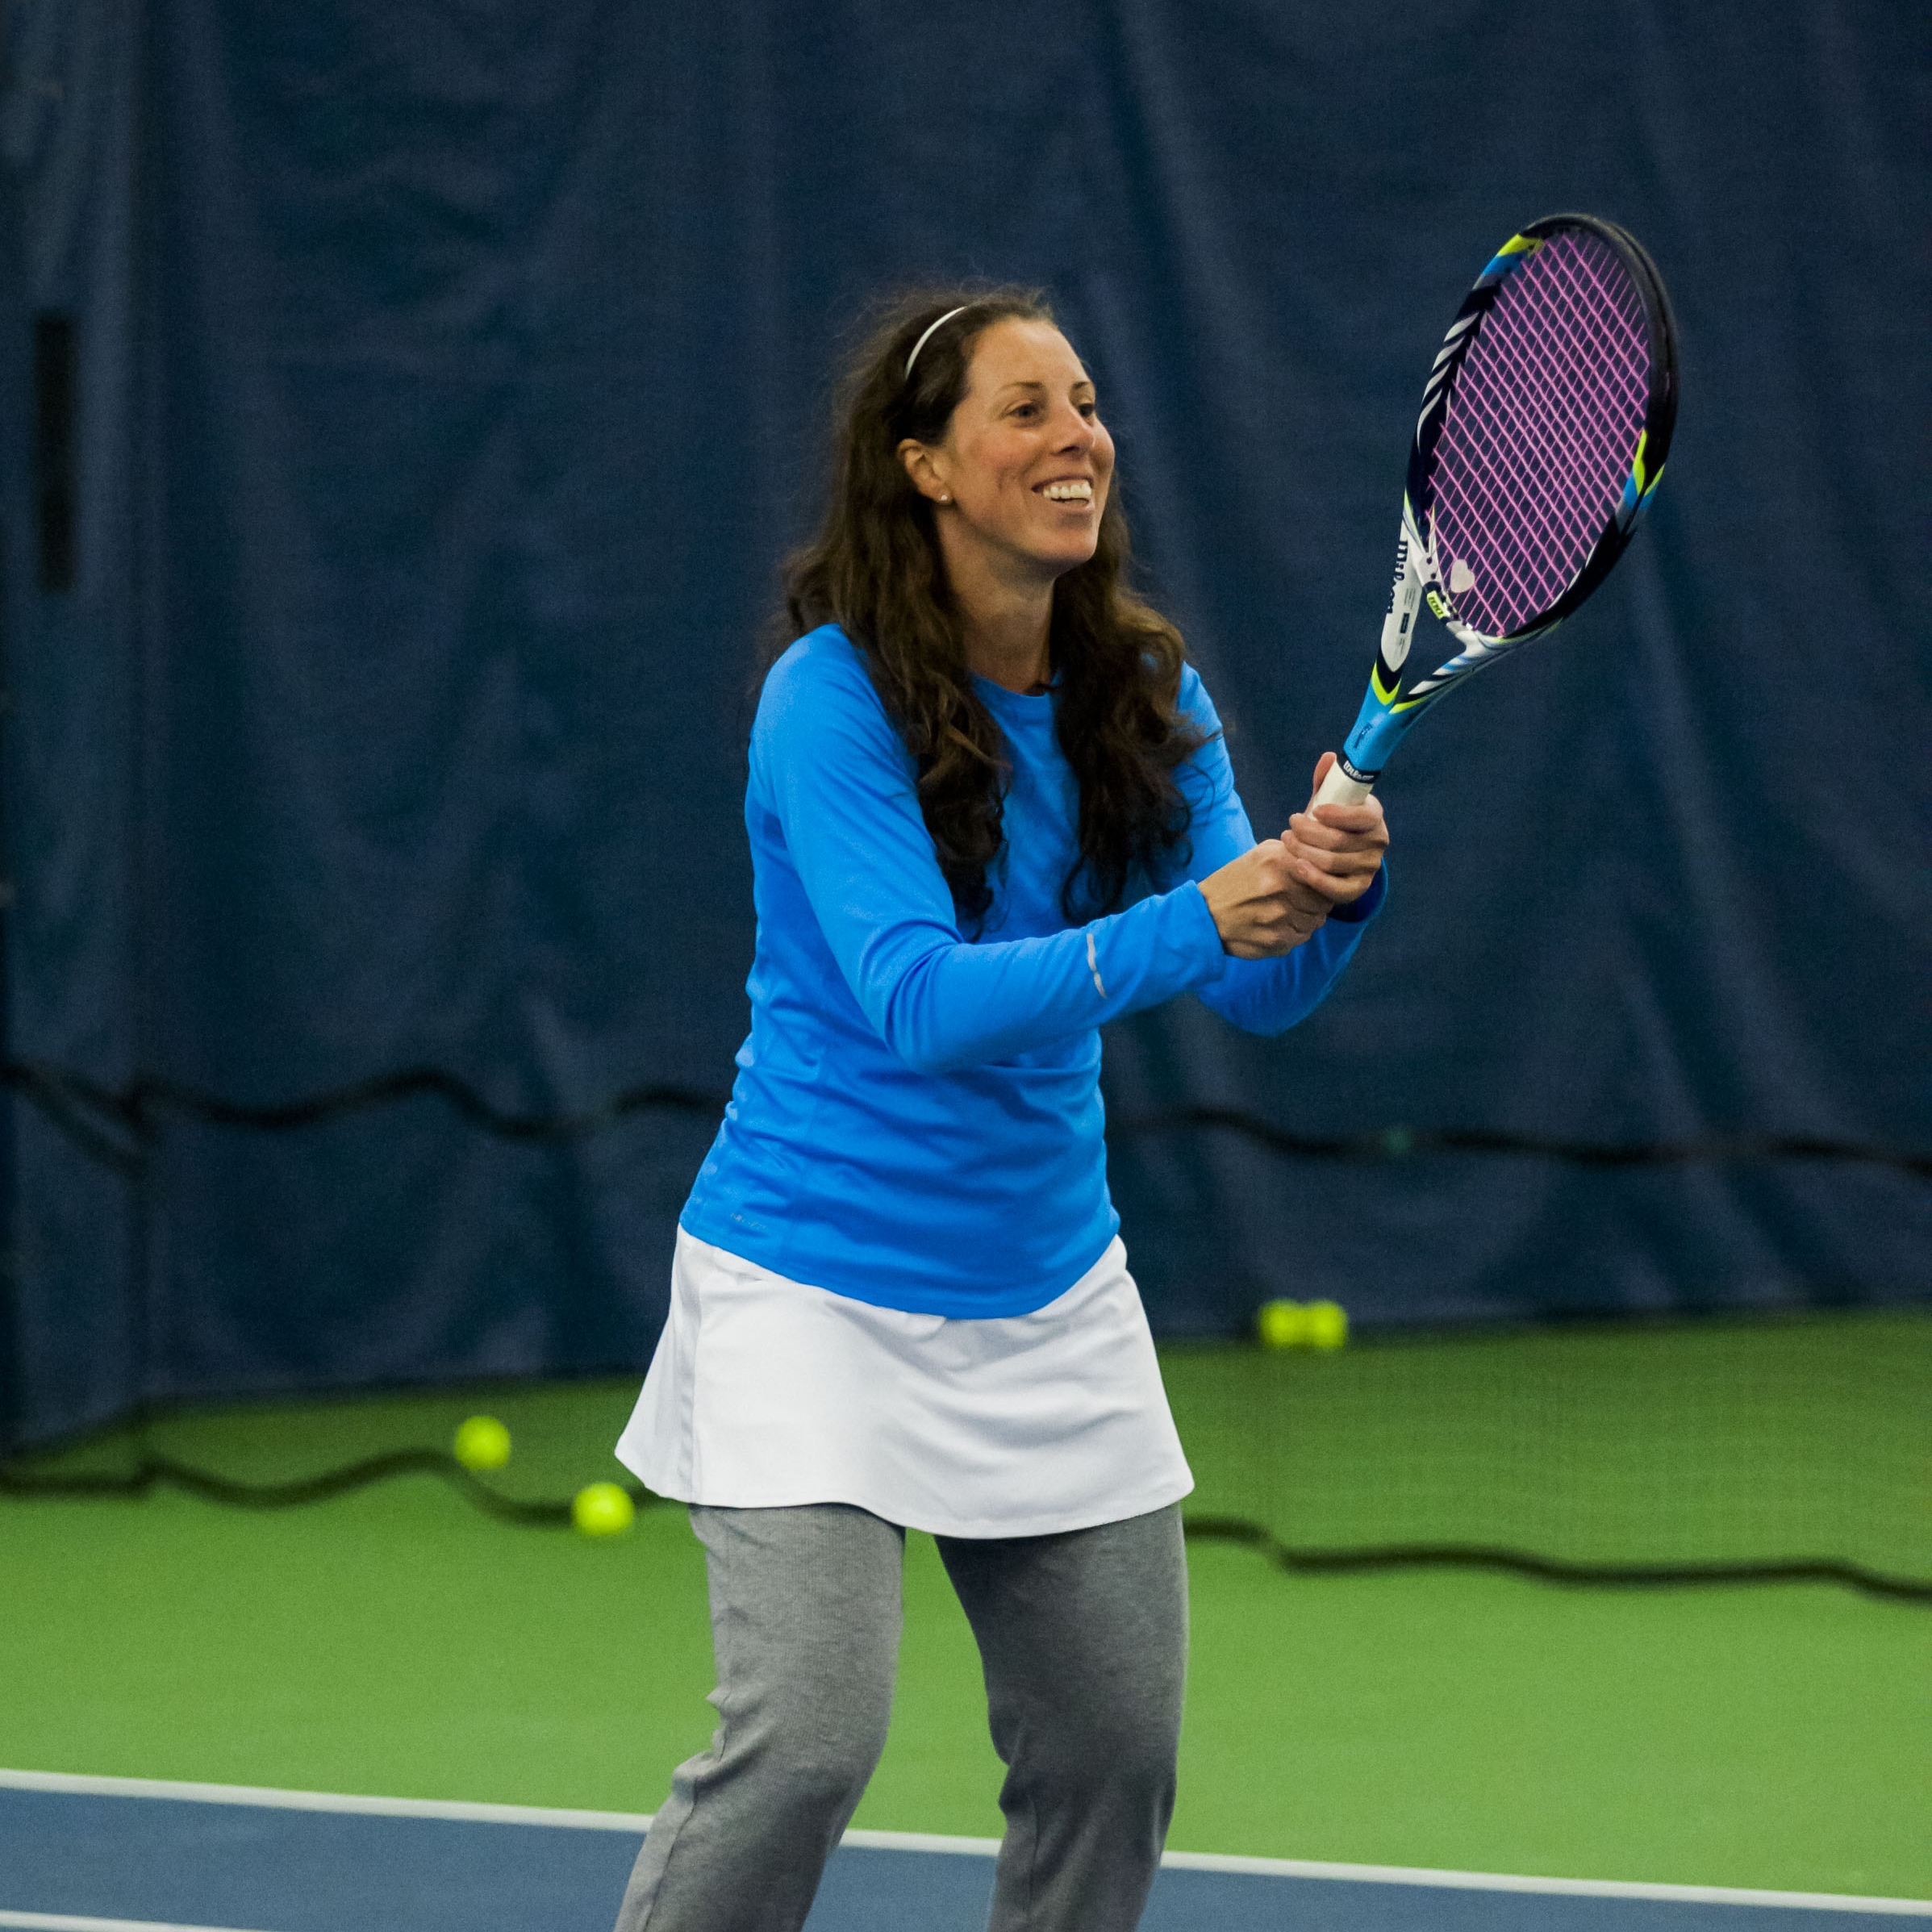 Adult Tennis Adult Clinics Tennis Clinics Adult Tennis Lessons Darien CT Indoor Tennis Kings Highway Stamford CT Covid Tennis Lessons Courts Equipment